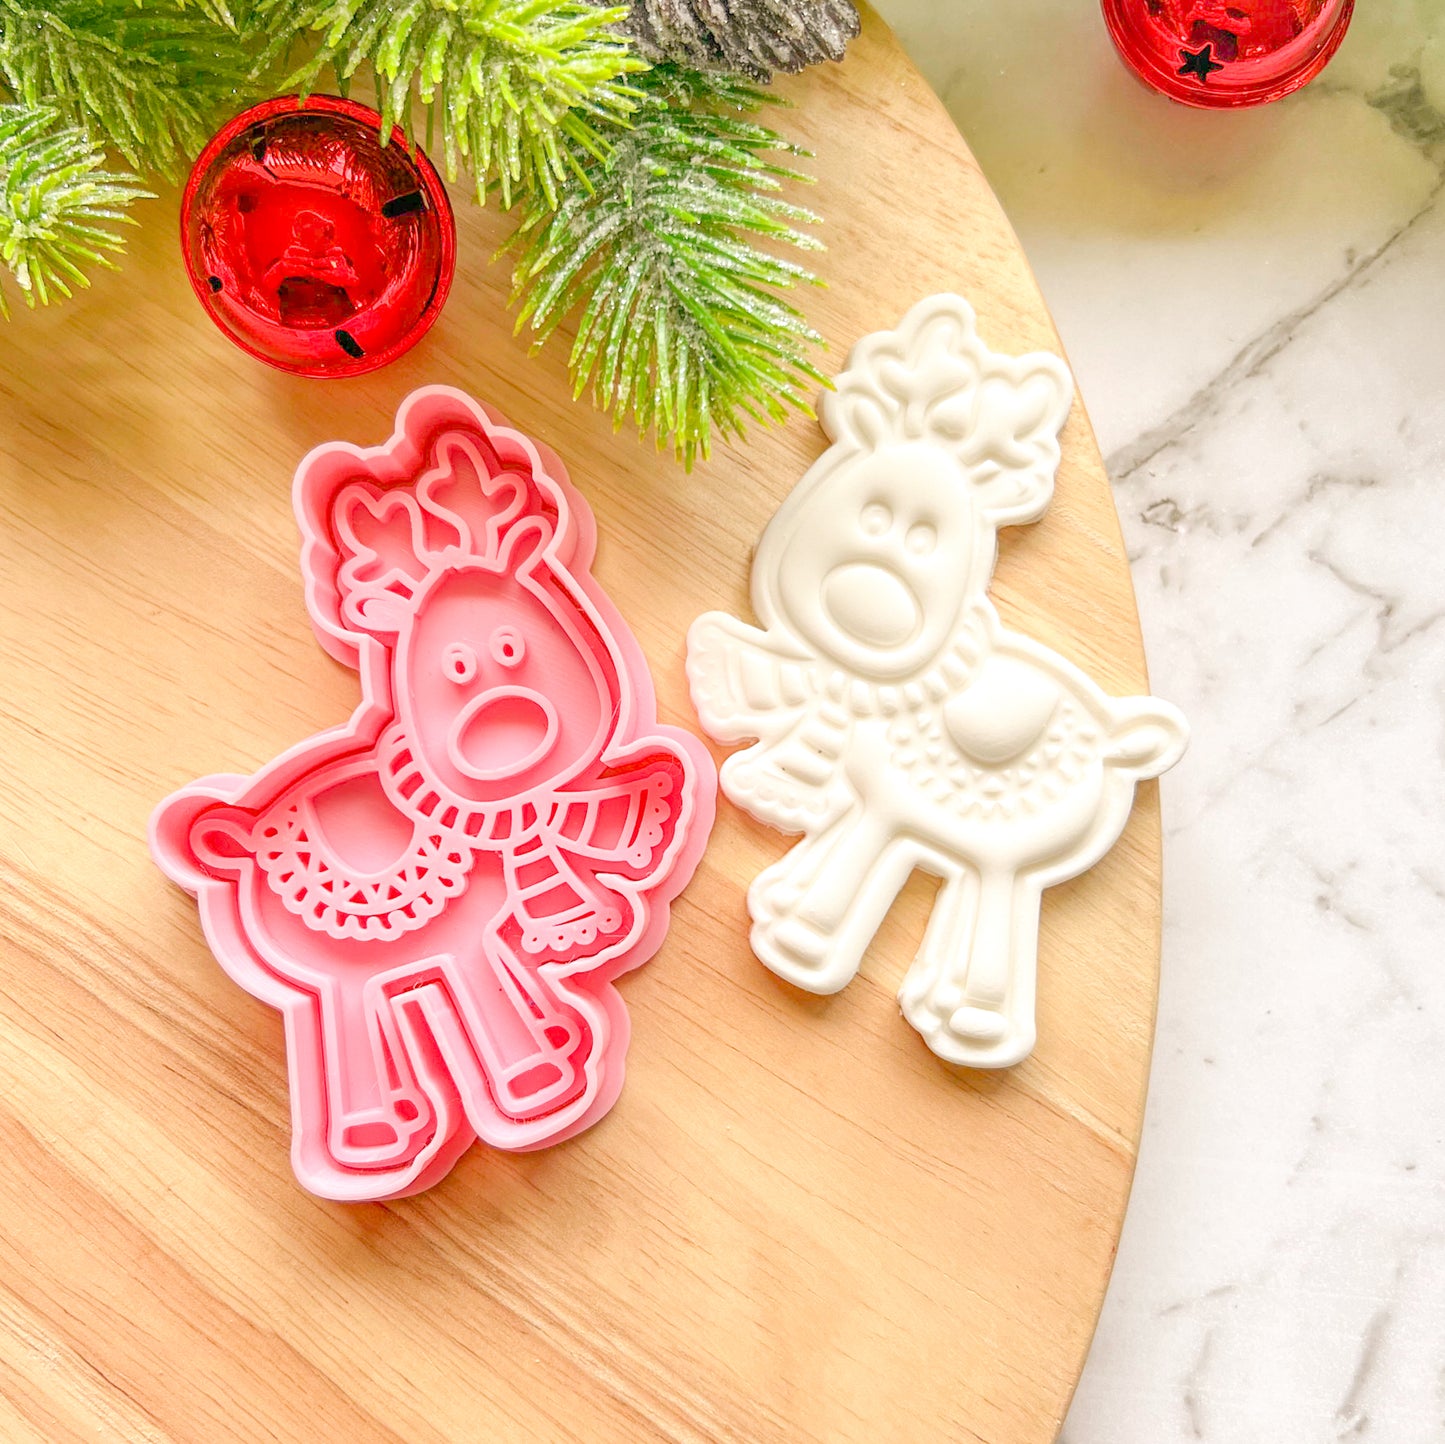 "Rudolf with scarf" Cookie Cutter & Stamp